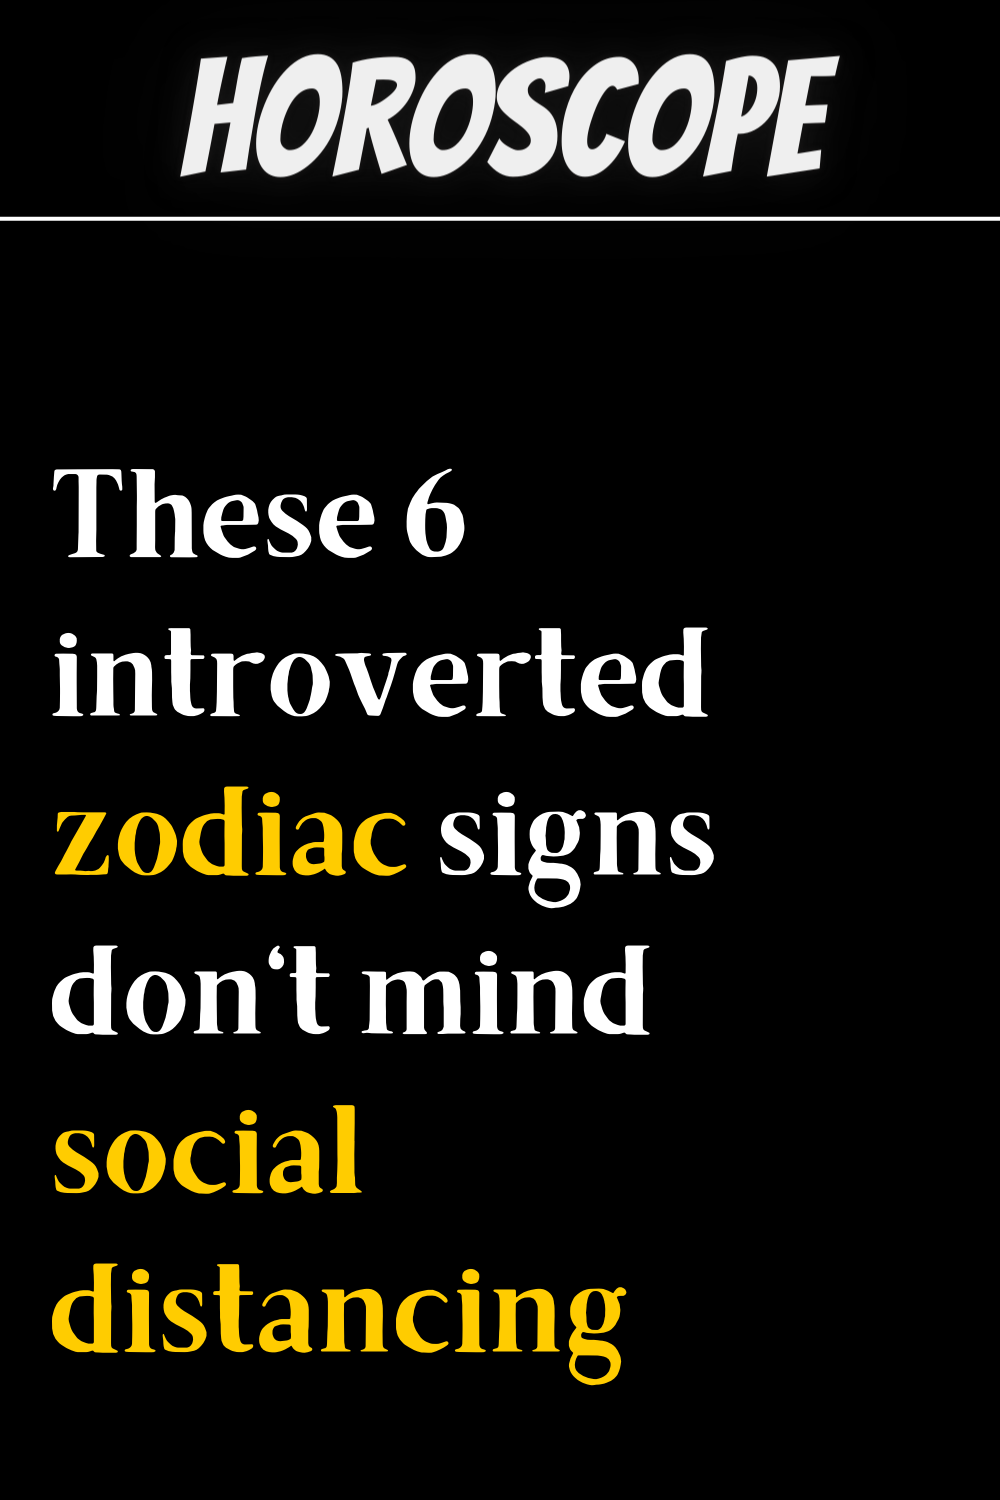 These 6 introverted zodiac signs don't mind social distancing